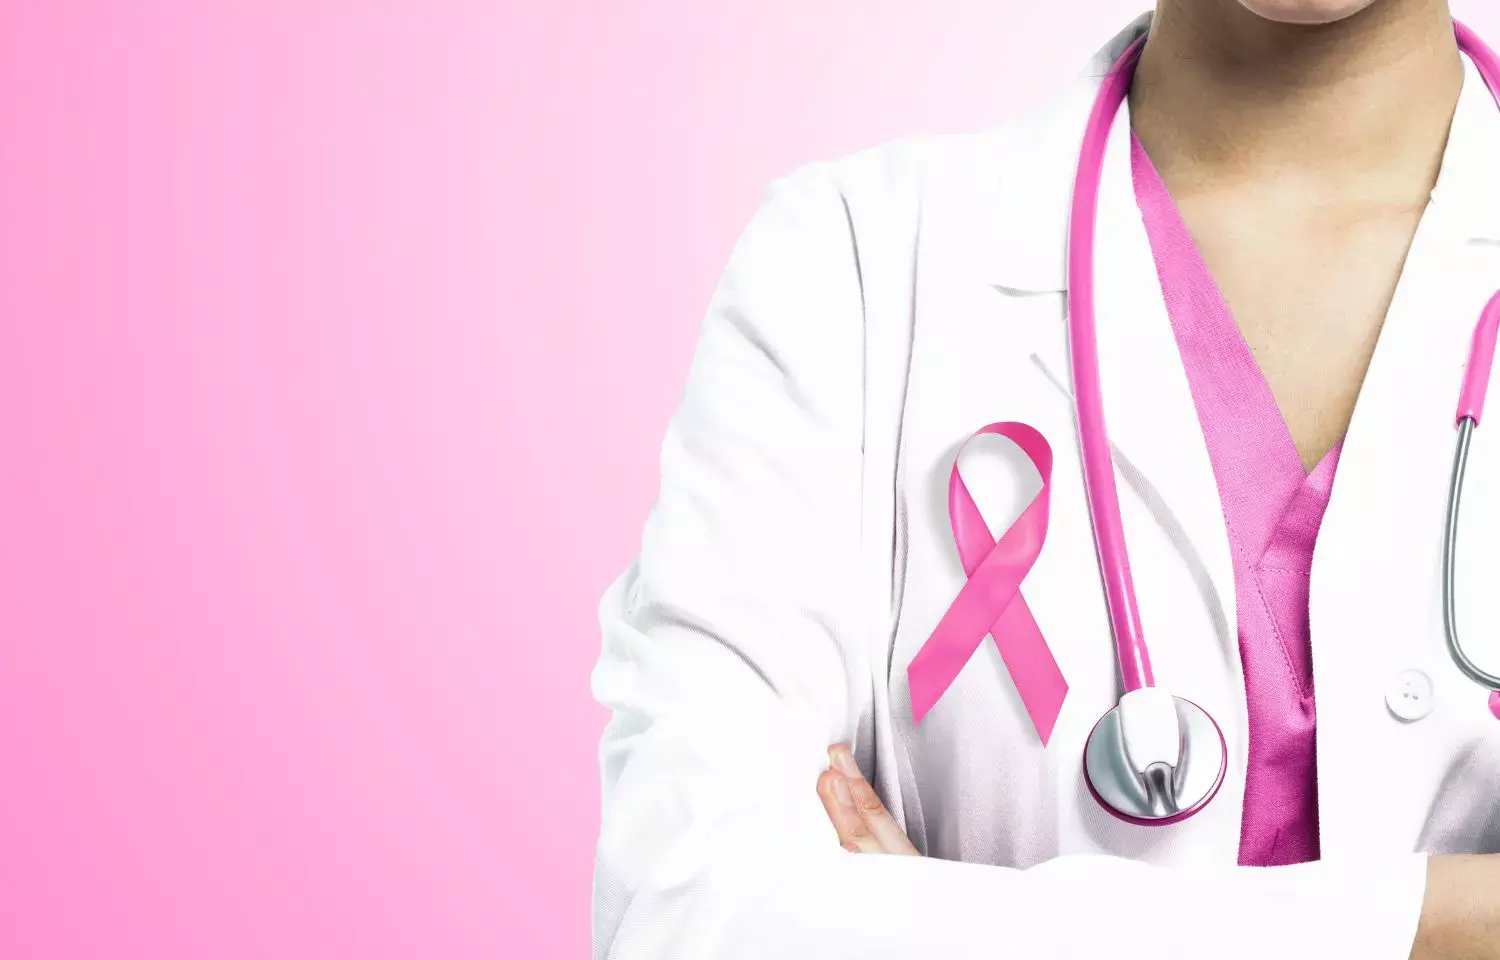 High Von Willebrand Factor linked to poor prognosis of breast cancer patients